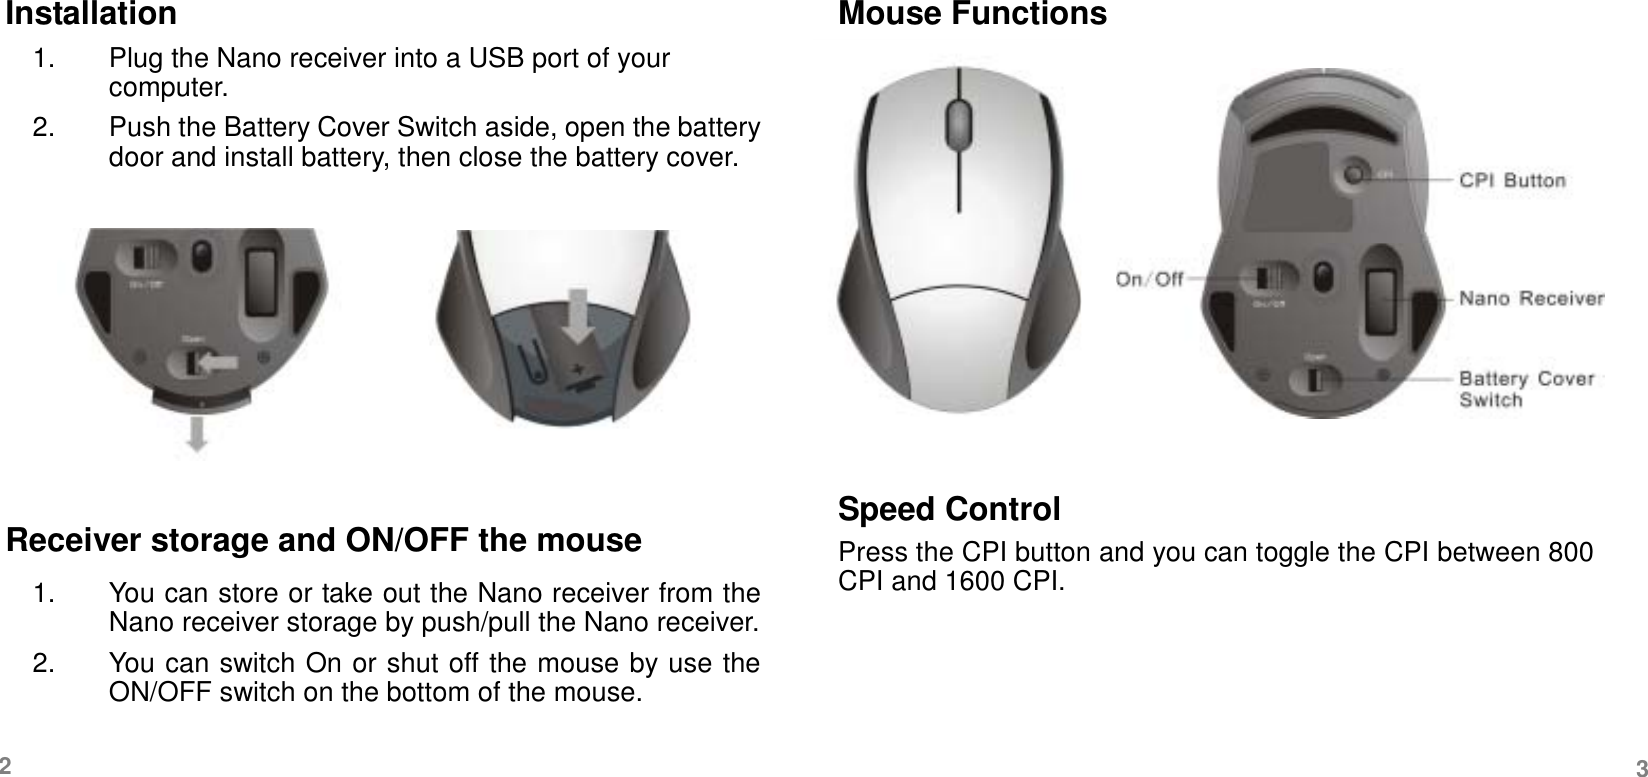   Installation 1.  Plug the Nano receiver into a USB port of your computer.  2.  Push the Battery Cover Switch aside, open the battery door and install battery, then close the battery cover.         Receiver storage and ON/OFF the mouse 1.  You can store or take out the Nano receiver from the Nano receiver storage by push/pull the Nano receiver. 2.  You can switch On or shut off the mouse by use the ON/OFF switch on the bottom of the mouse. Mouse Functions         Speed Control Press the CPI button and you can toggle the CPI between 800 CPI and 1600 CPI.     2  3 